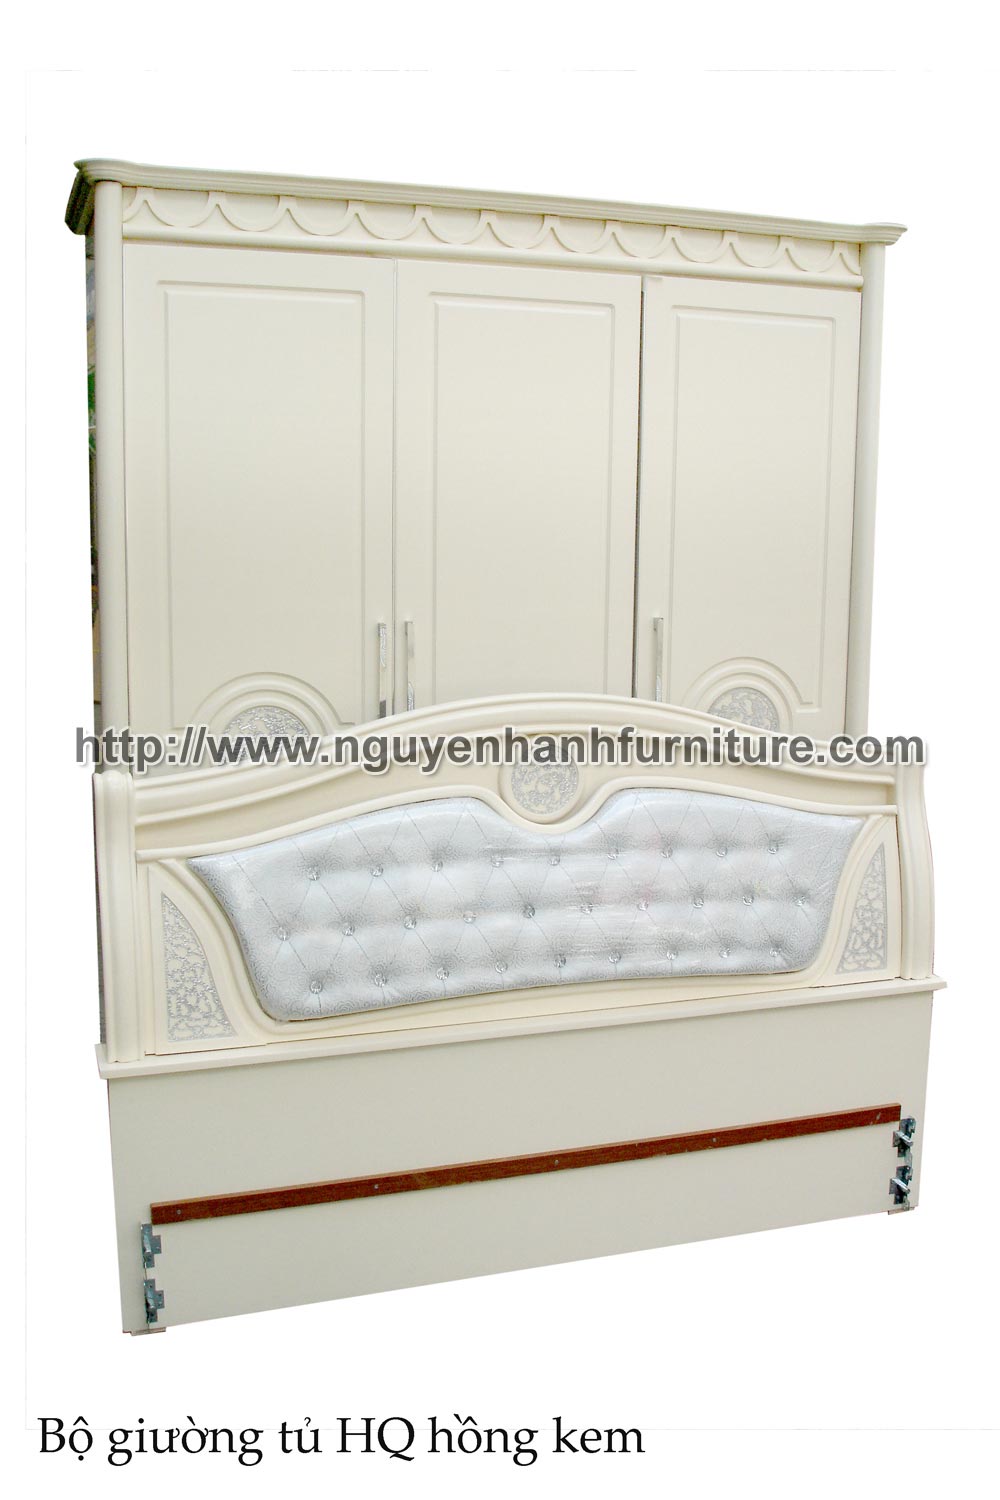 Name product: Pinky South Korean style Set of Wardrobe and Bed  